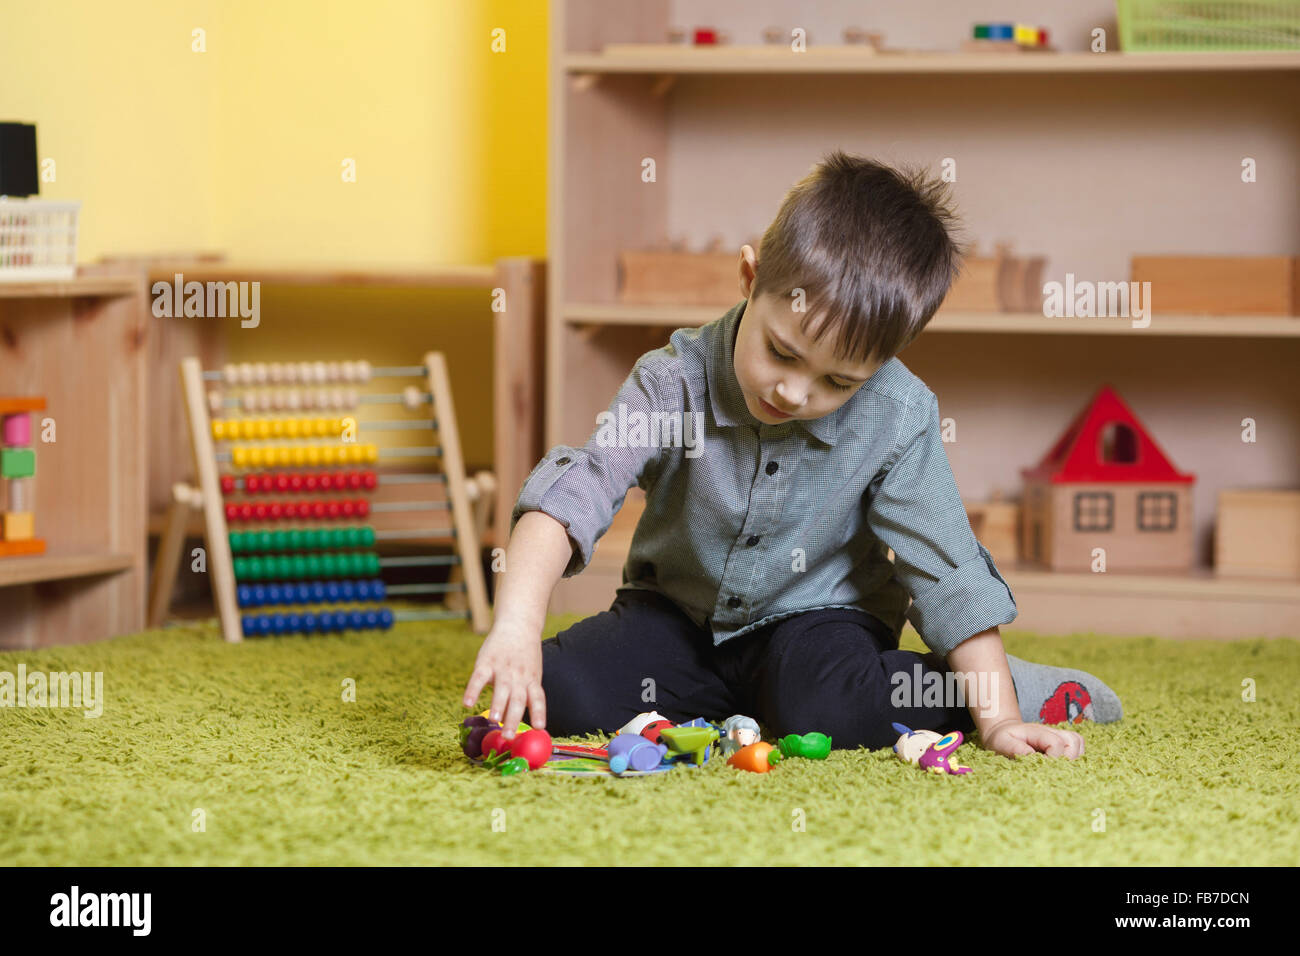 Full length of boy playing with toys on rug in classroom Stock Photo